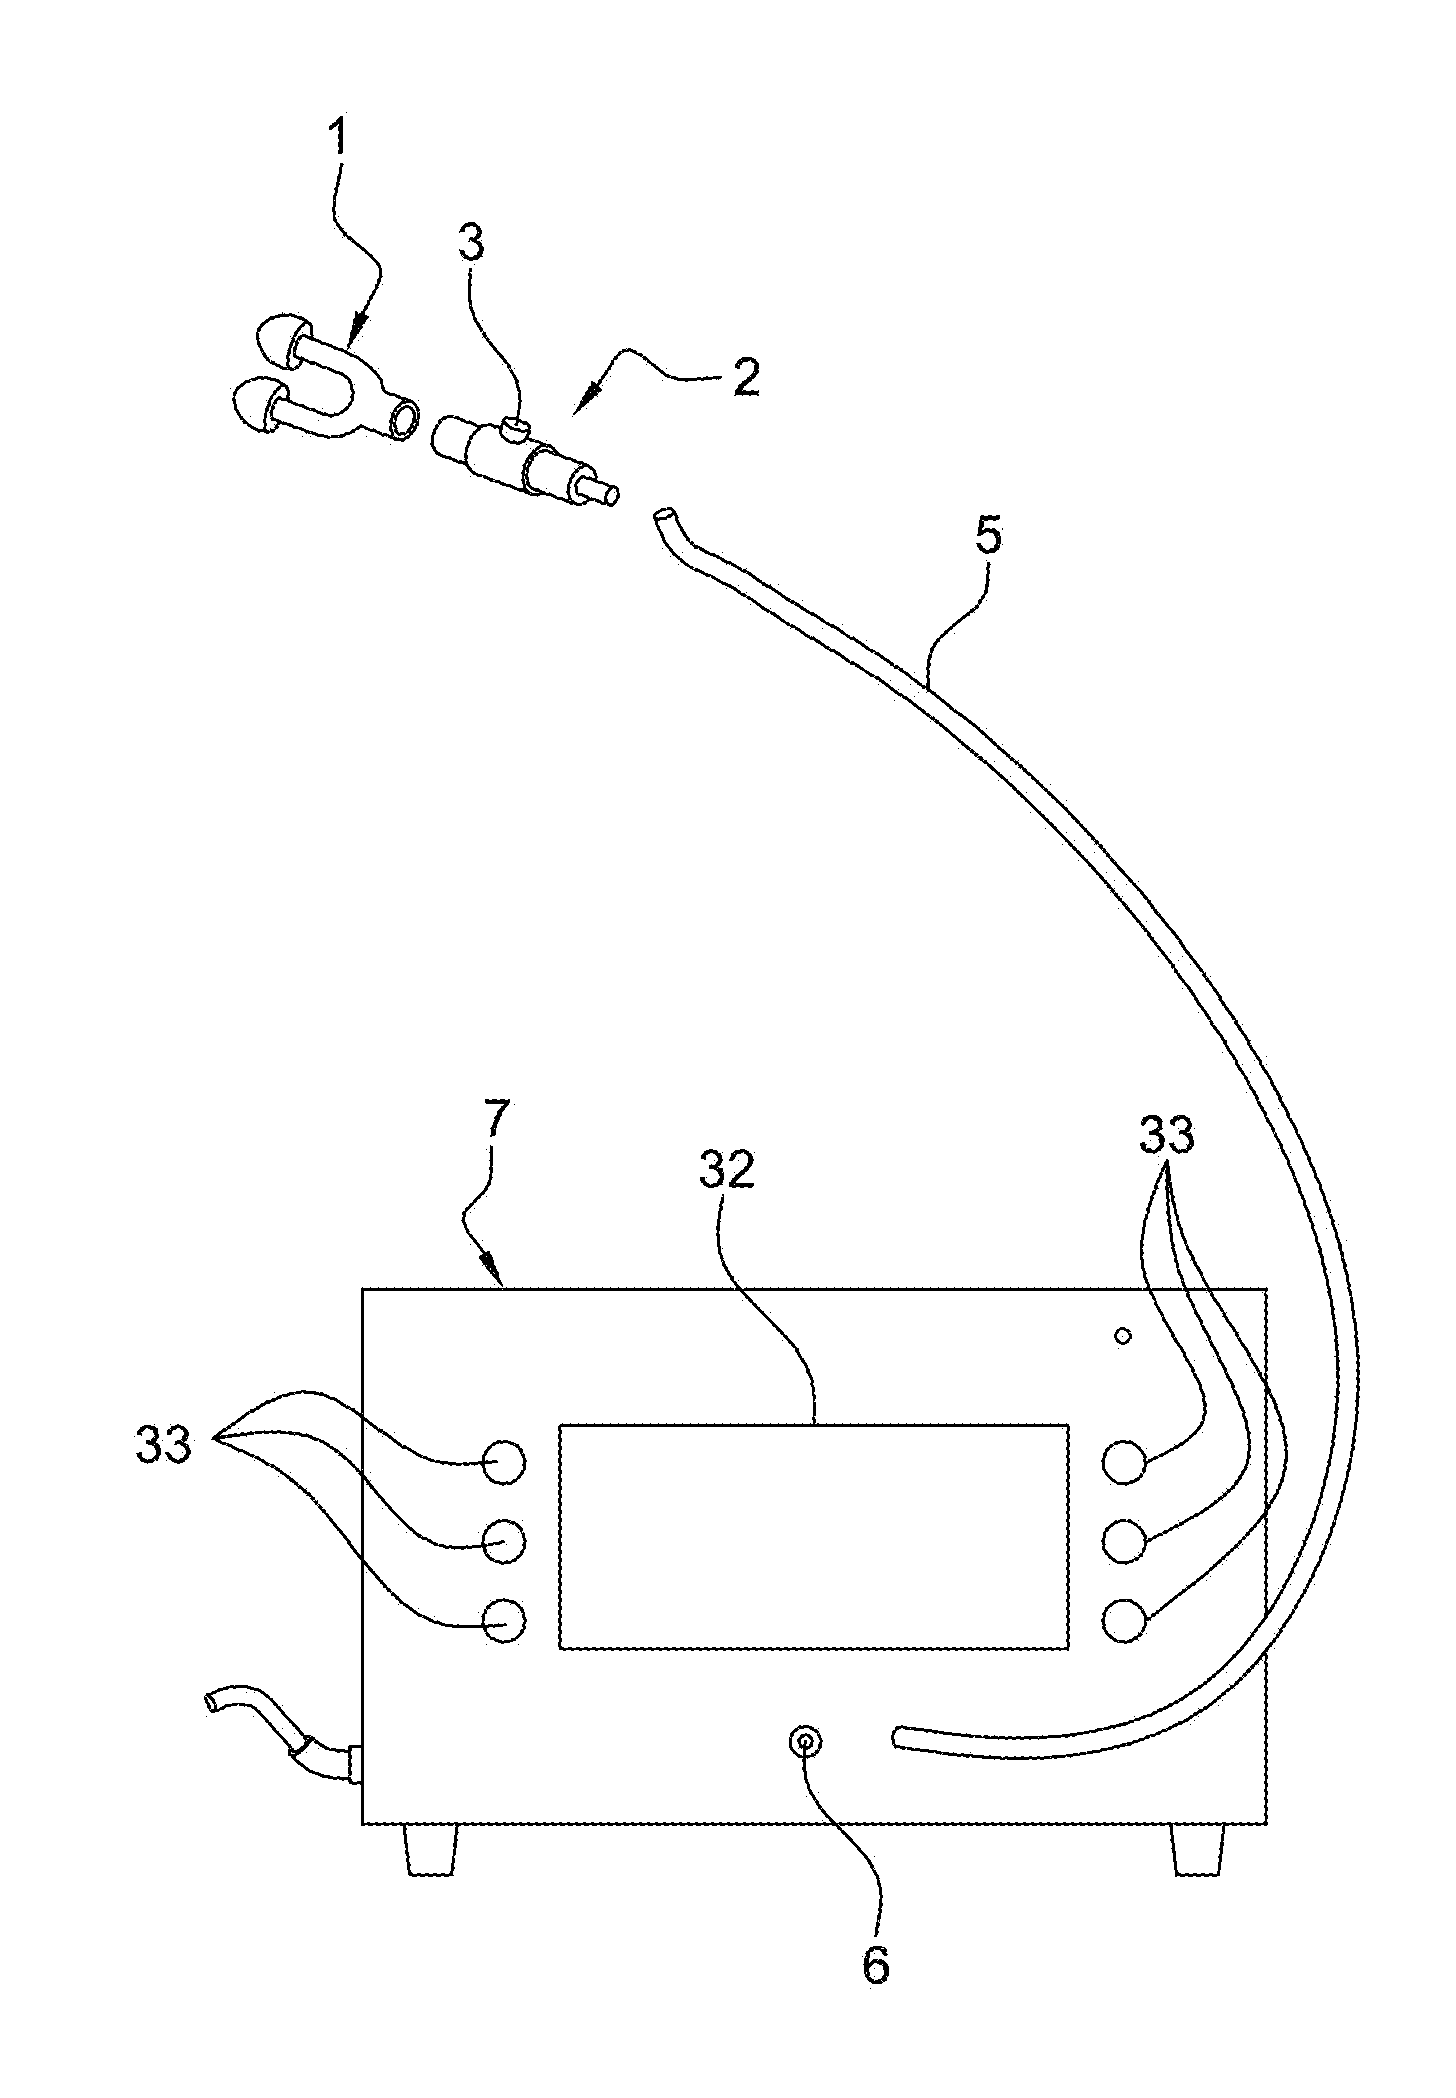 Device for applying a pneumatic pressure stimulus in the nasal fossae and eustachian tube at the time of deglutition